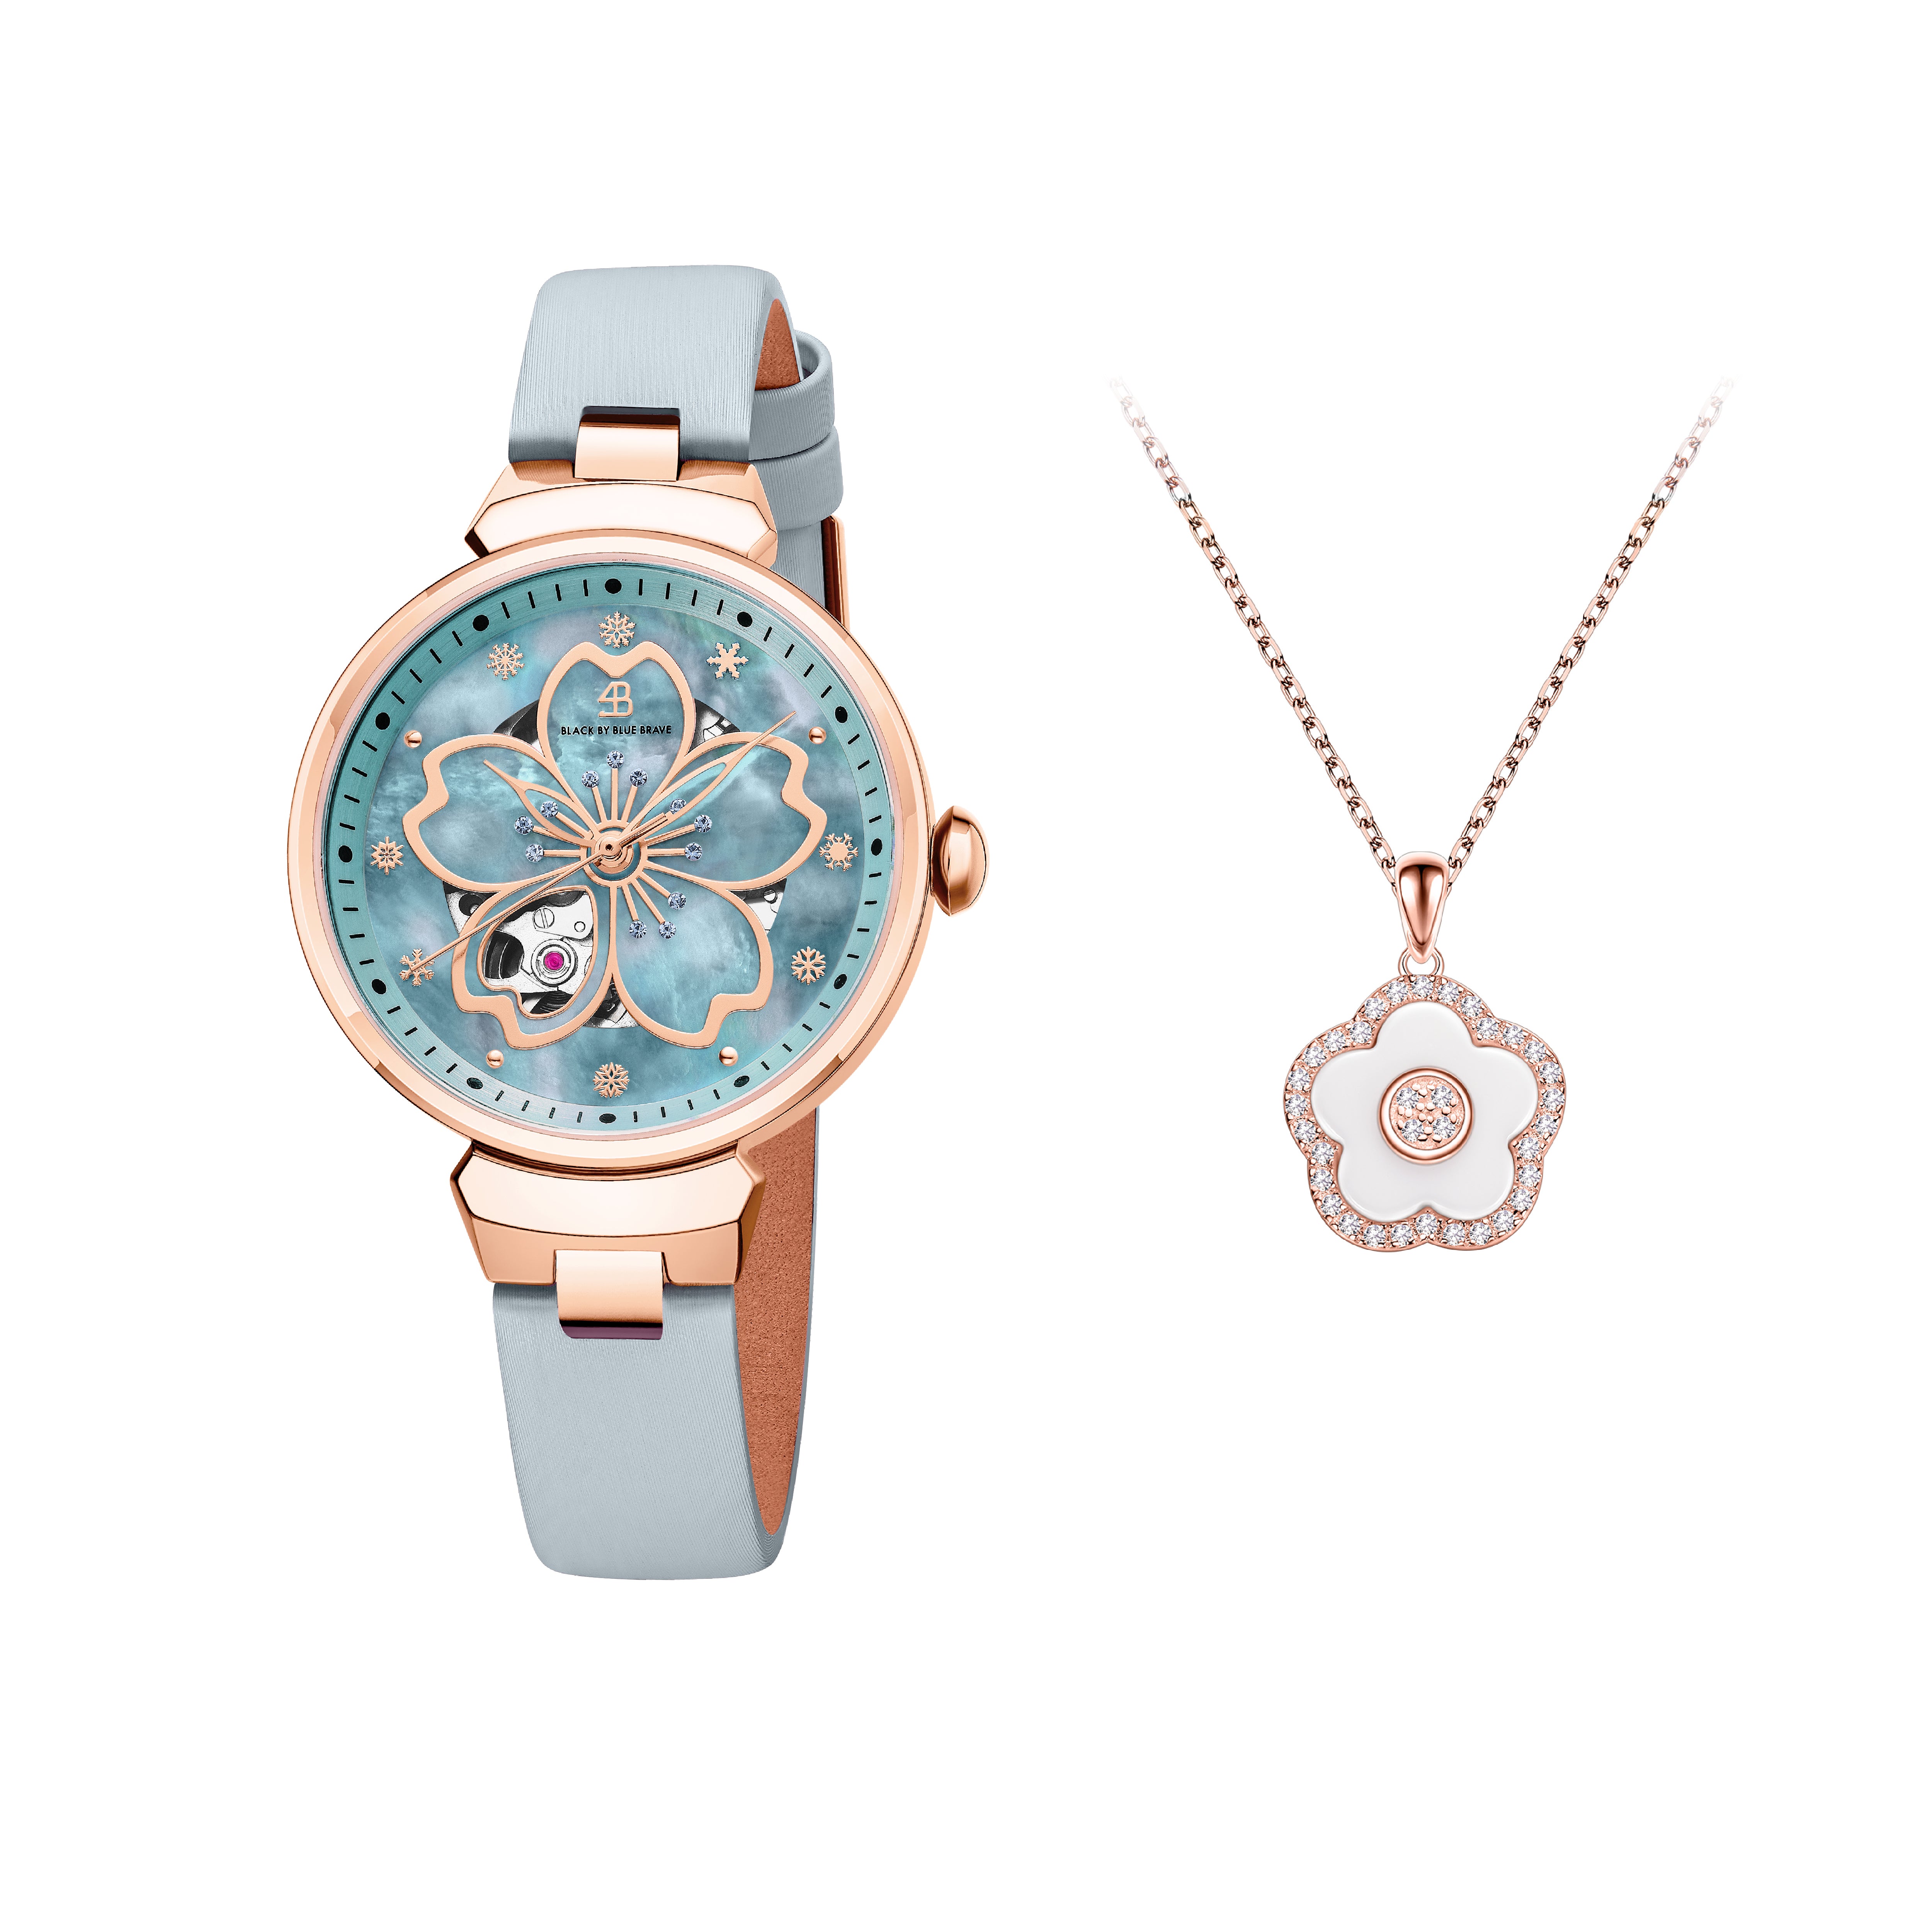 Blue Cherry Blossom 36mm Automatic Watch & Rosegold Flower Necklace & White Ceramic